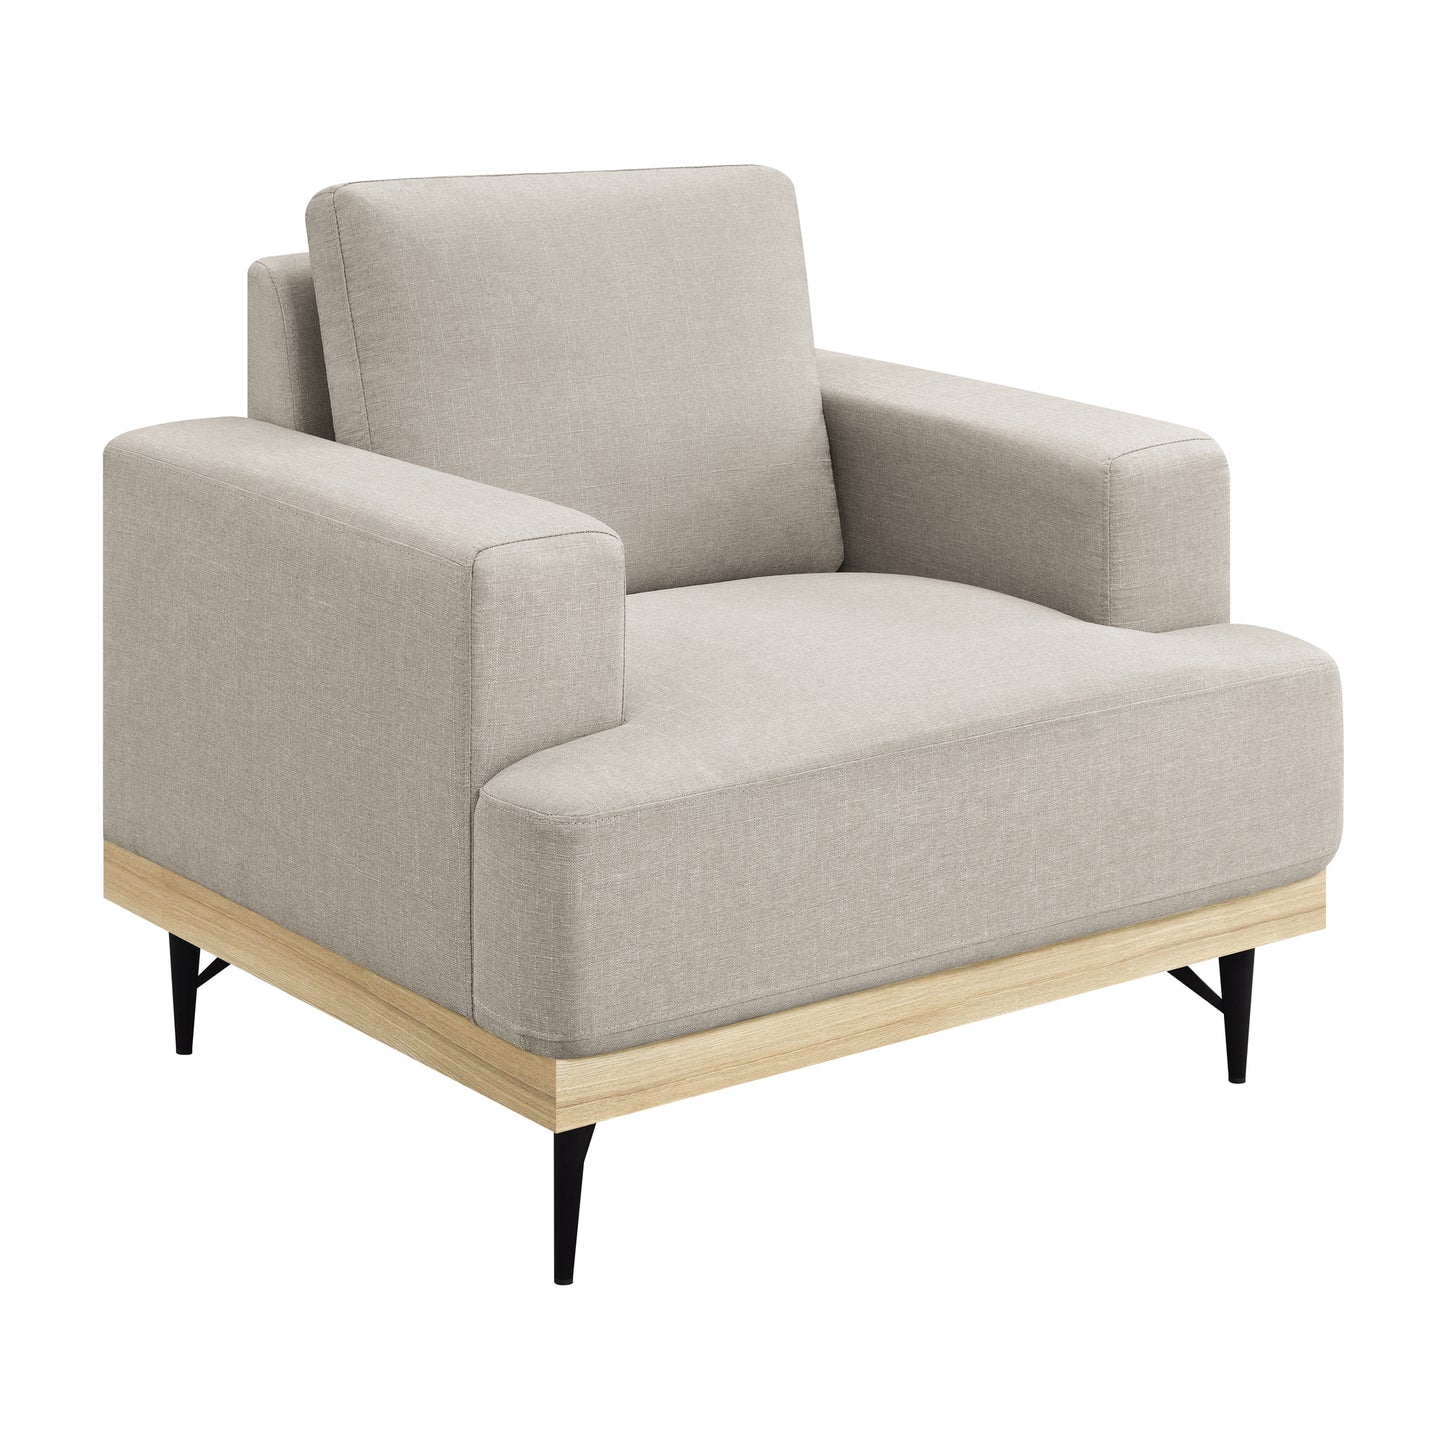 Kester Recessed Track Arm Chair Beige